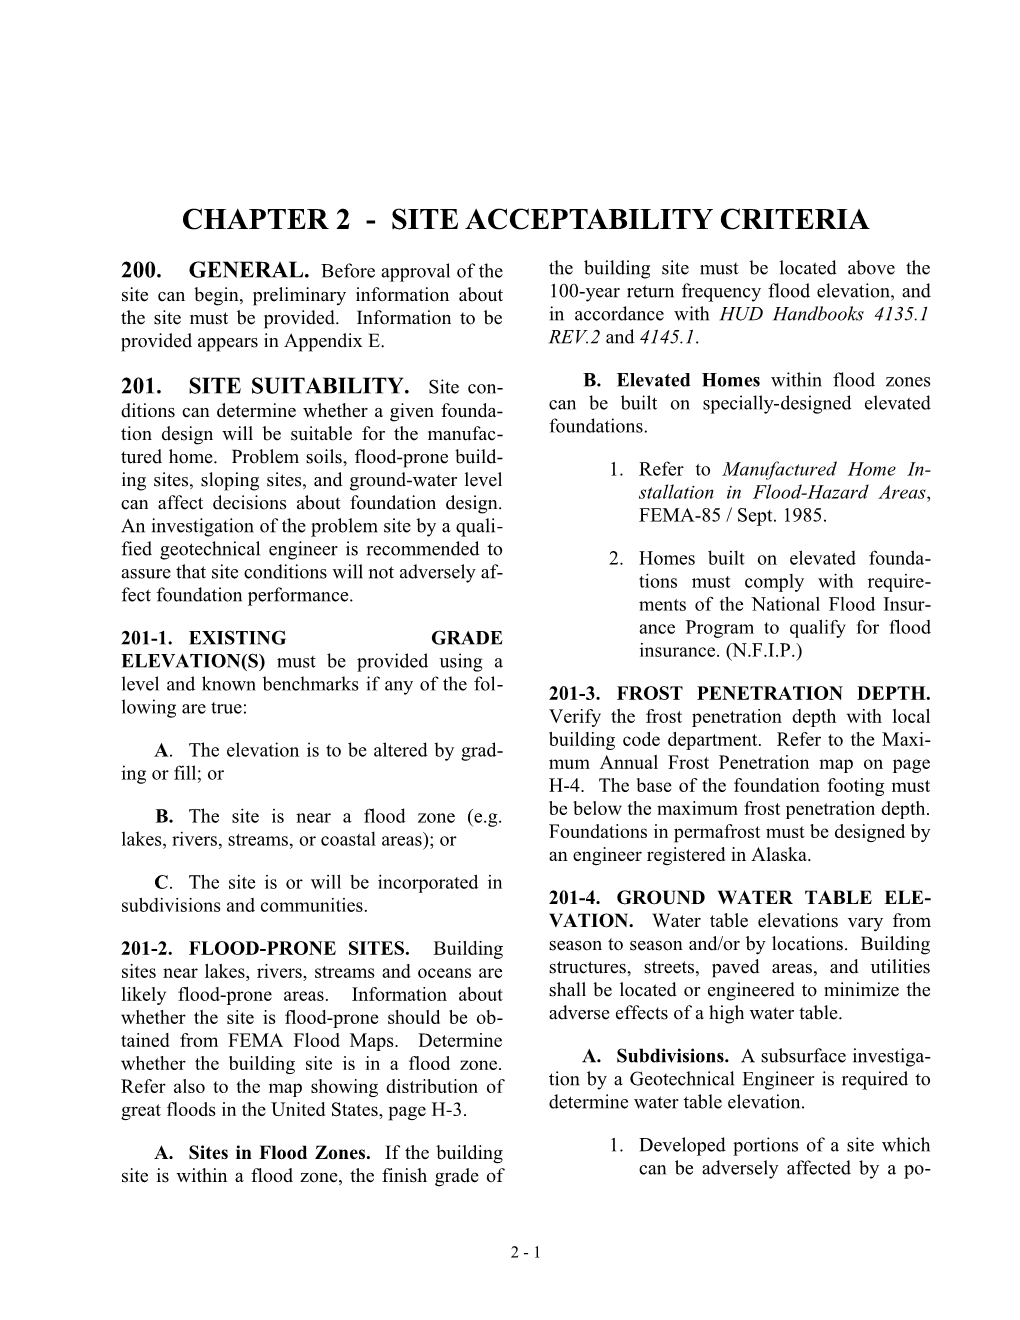 Chapter 2 - Site Acceptability Criteria